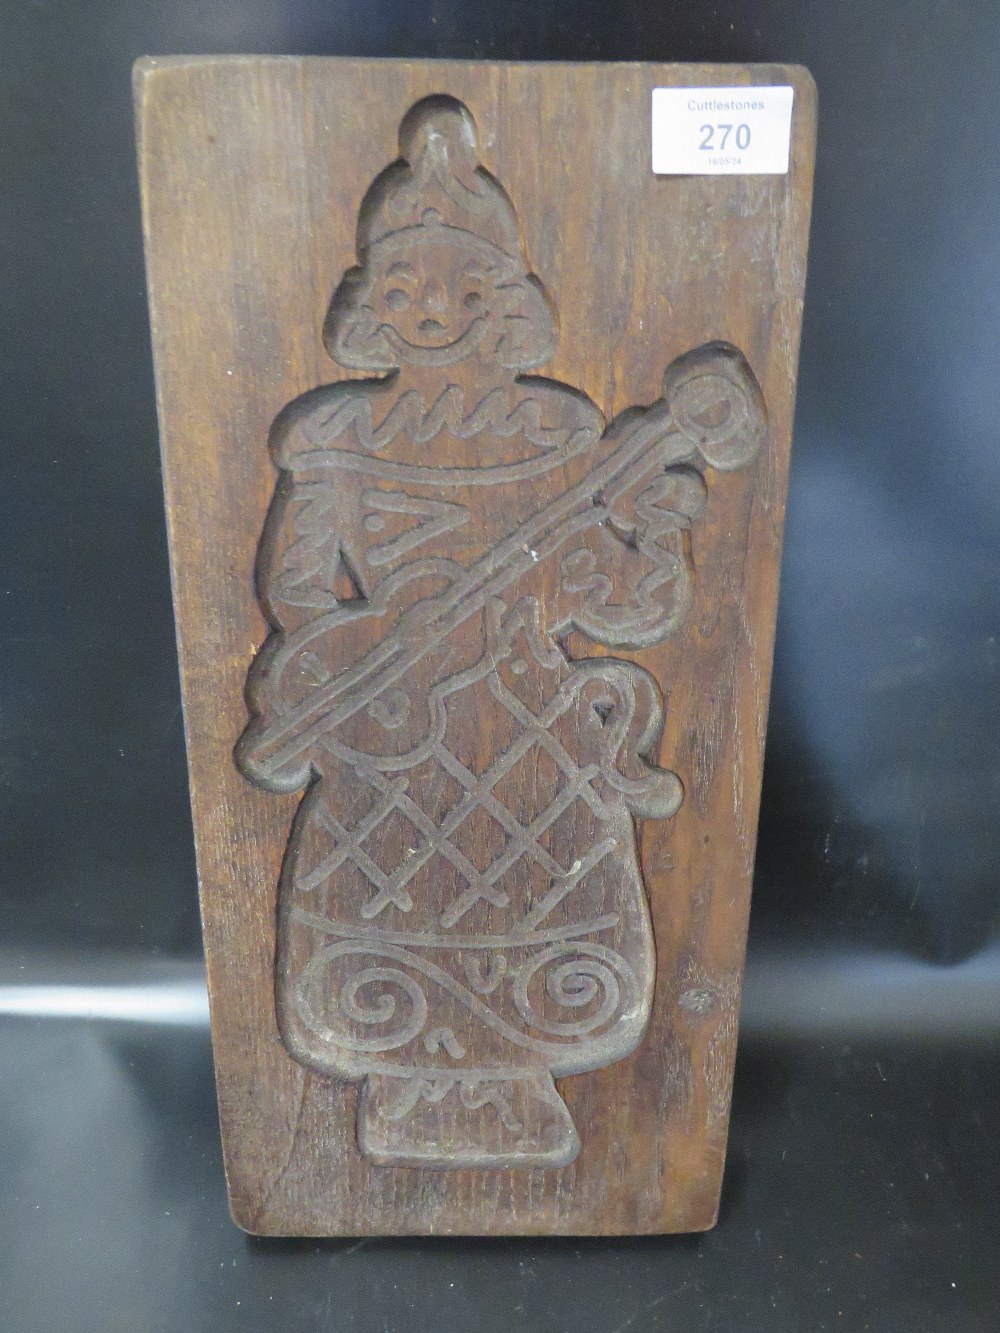 A VINTAGE WOODEN BOOK PRESS WITH THE IMAGE OF A CLOWN